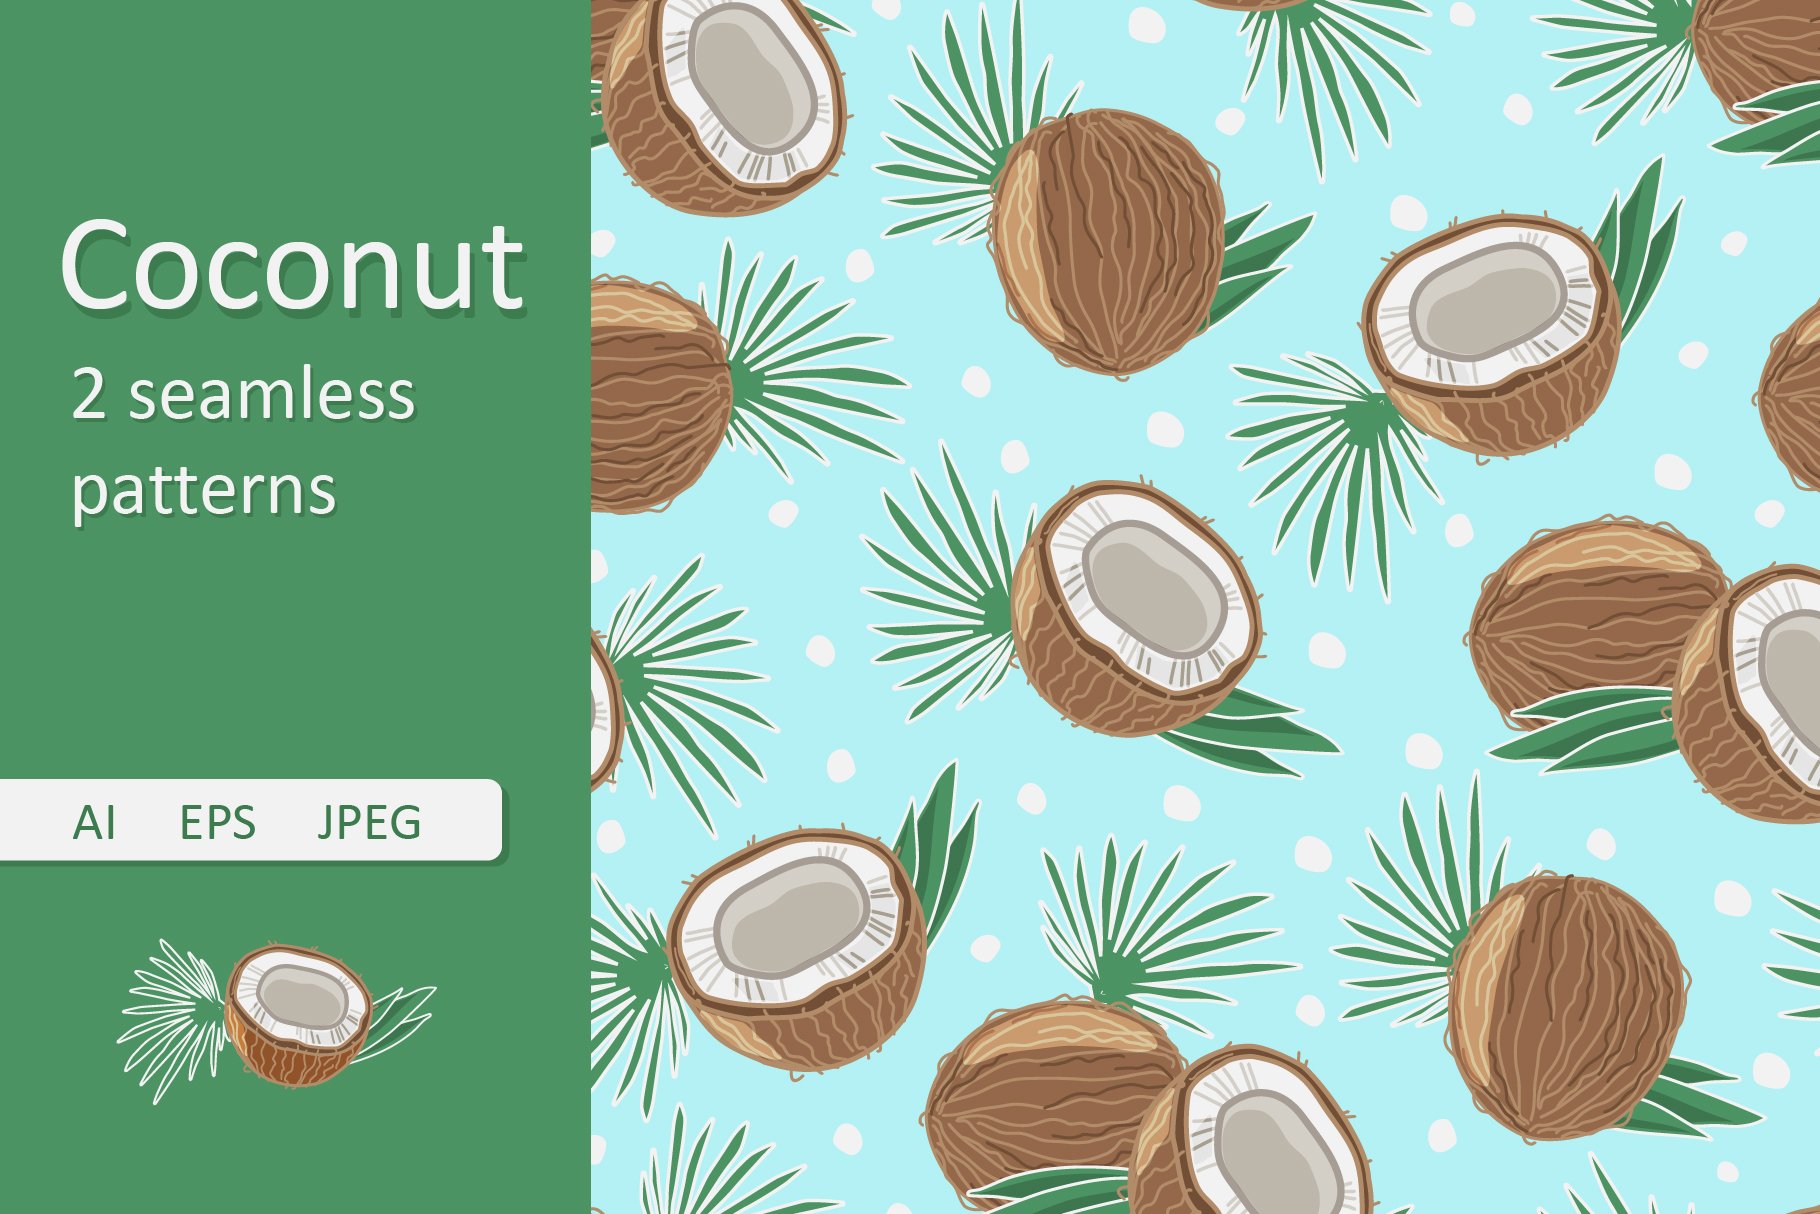 Coconut patterns cover image.